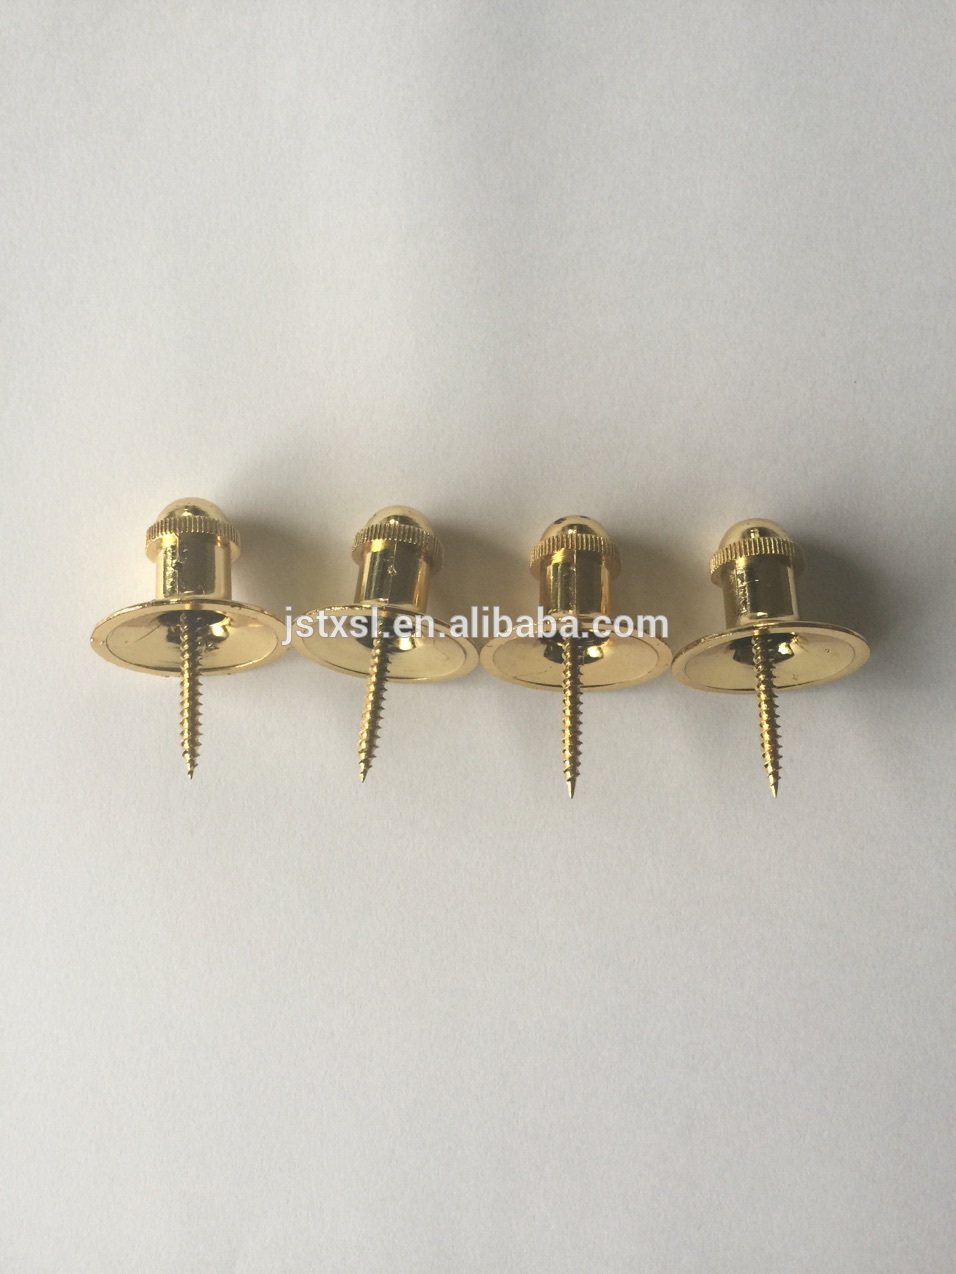 Coffin accessories screw Model 5 # with plastic and metal material for coffin